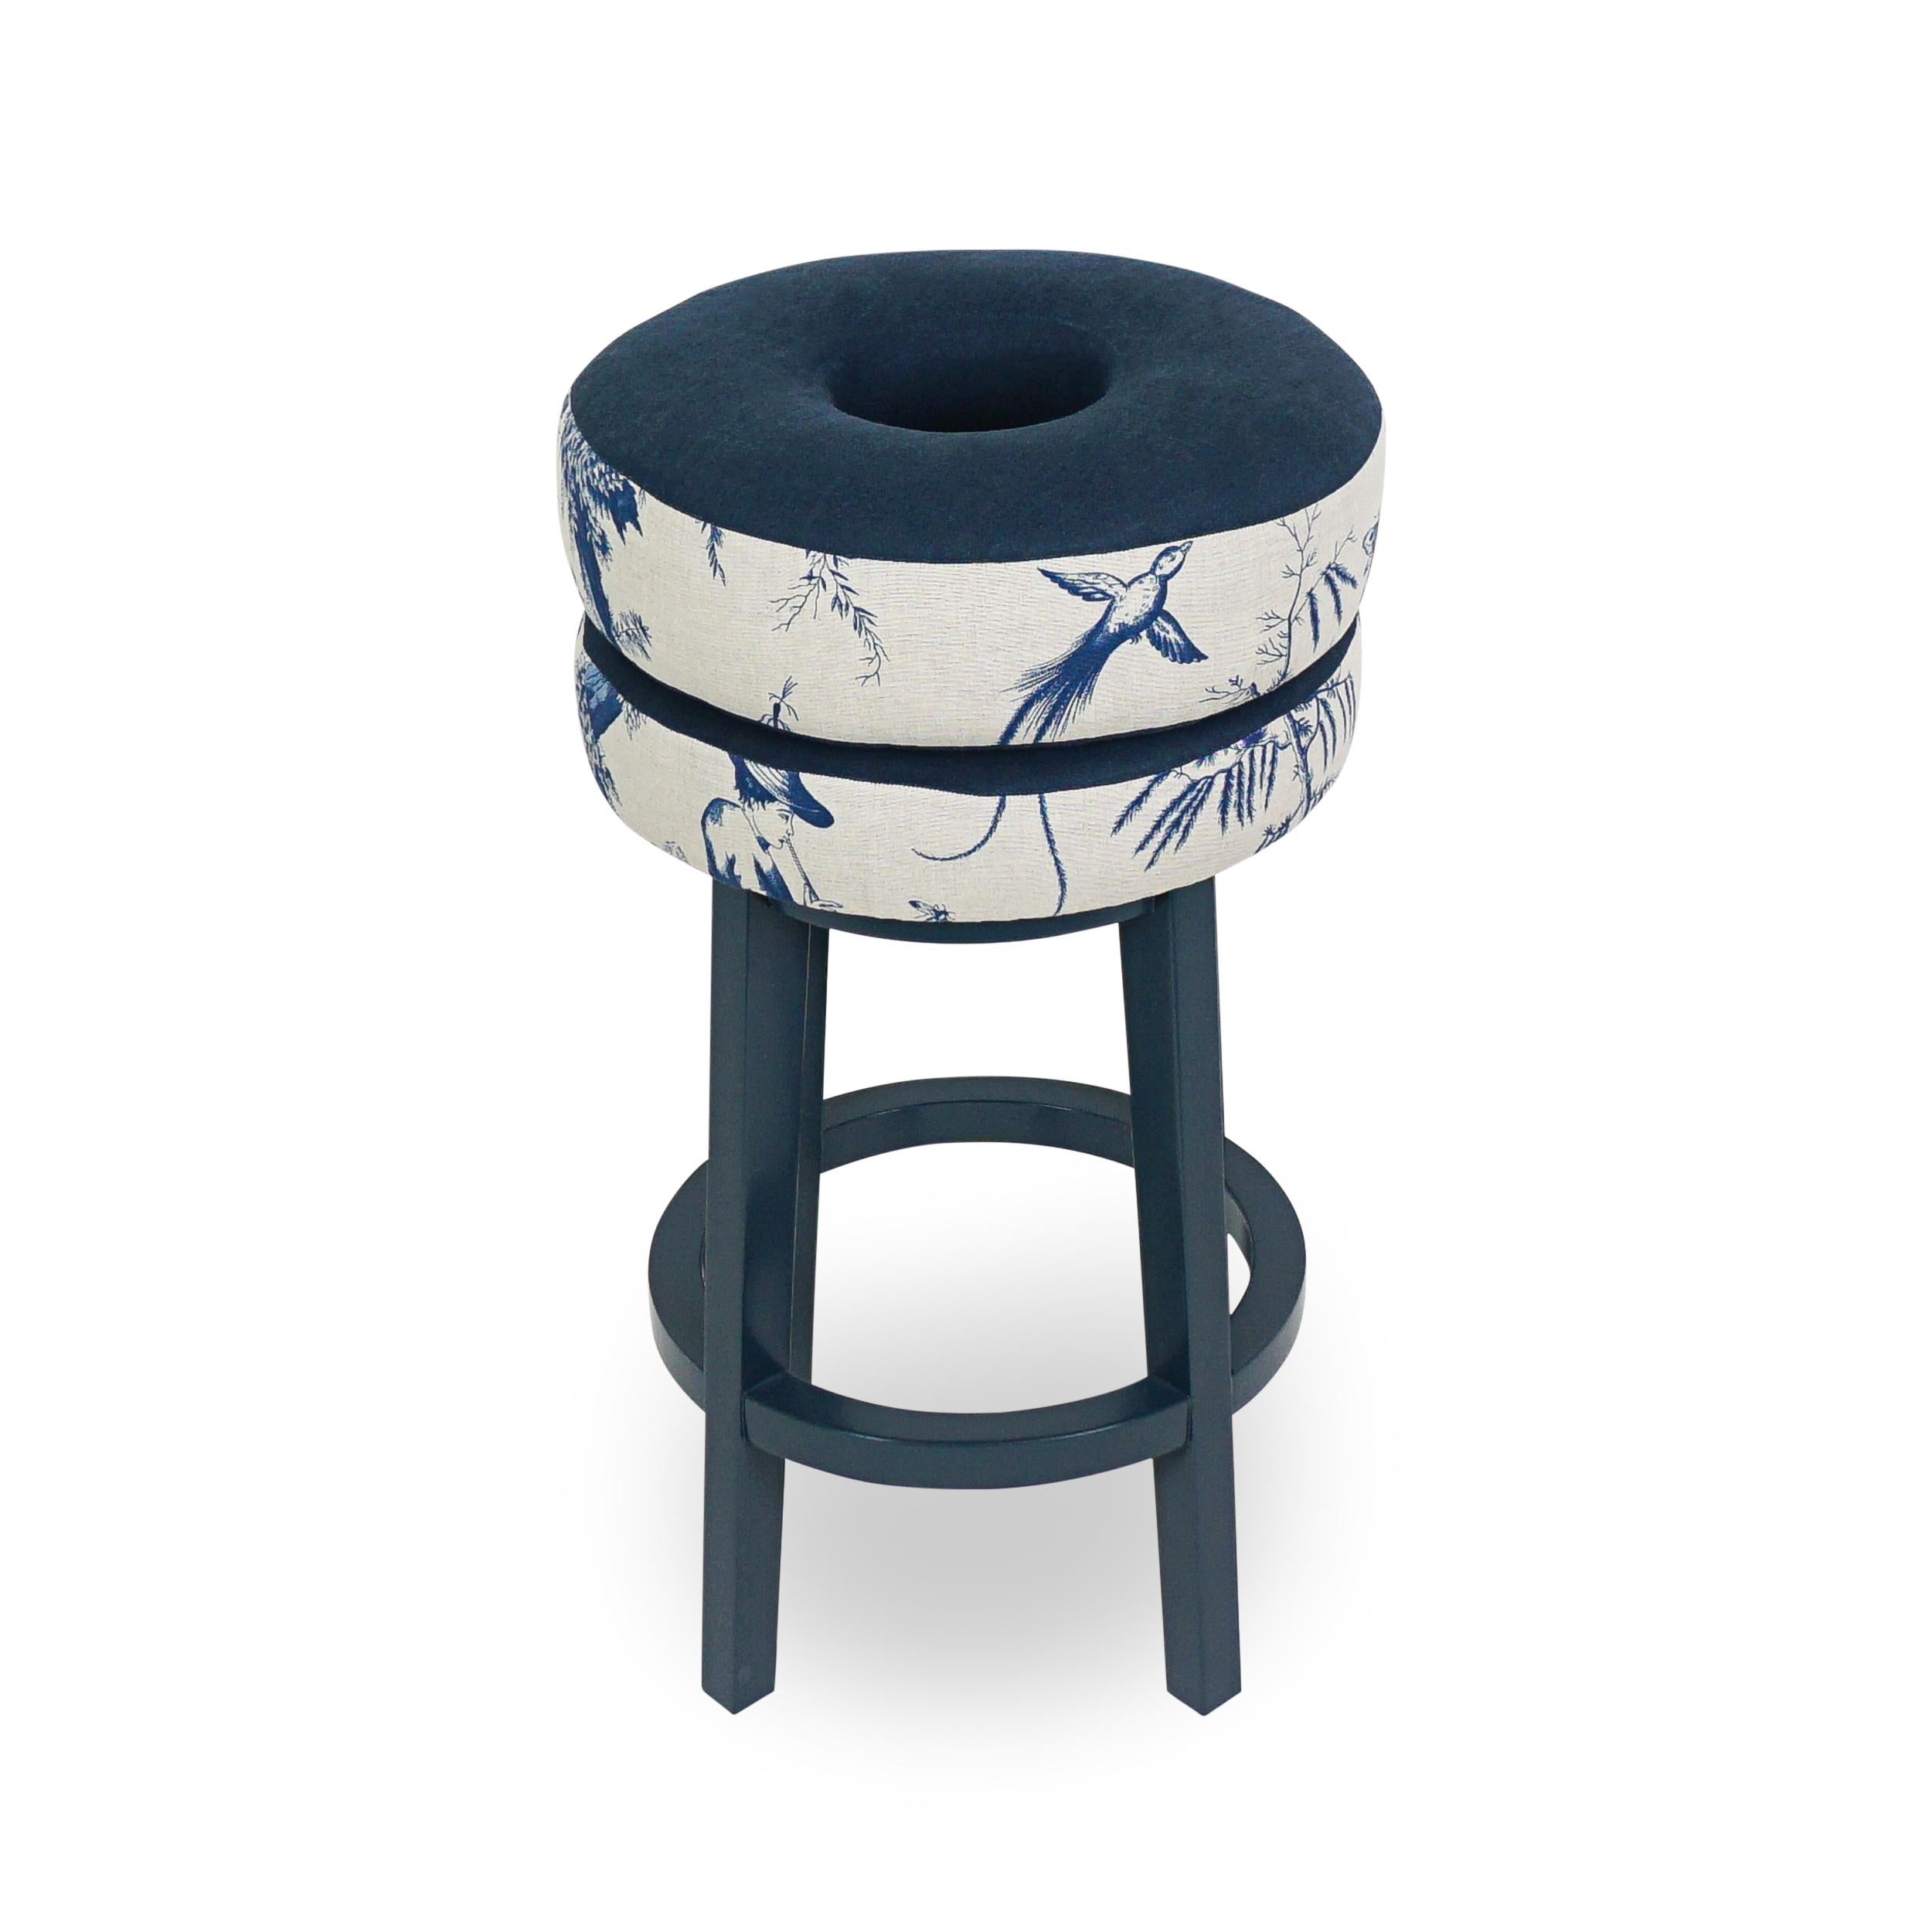 This classic and stunning bar stool design features an ergonomically shaped comfortable double cushion, donut shaped seat with durable navy fabric on top and historically inspired Japanese Shengyou Toile by Schumacher on the sides. The hard maple